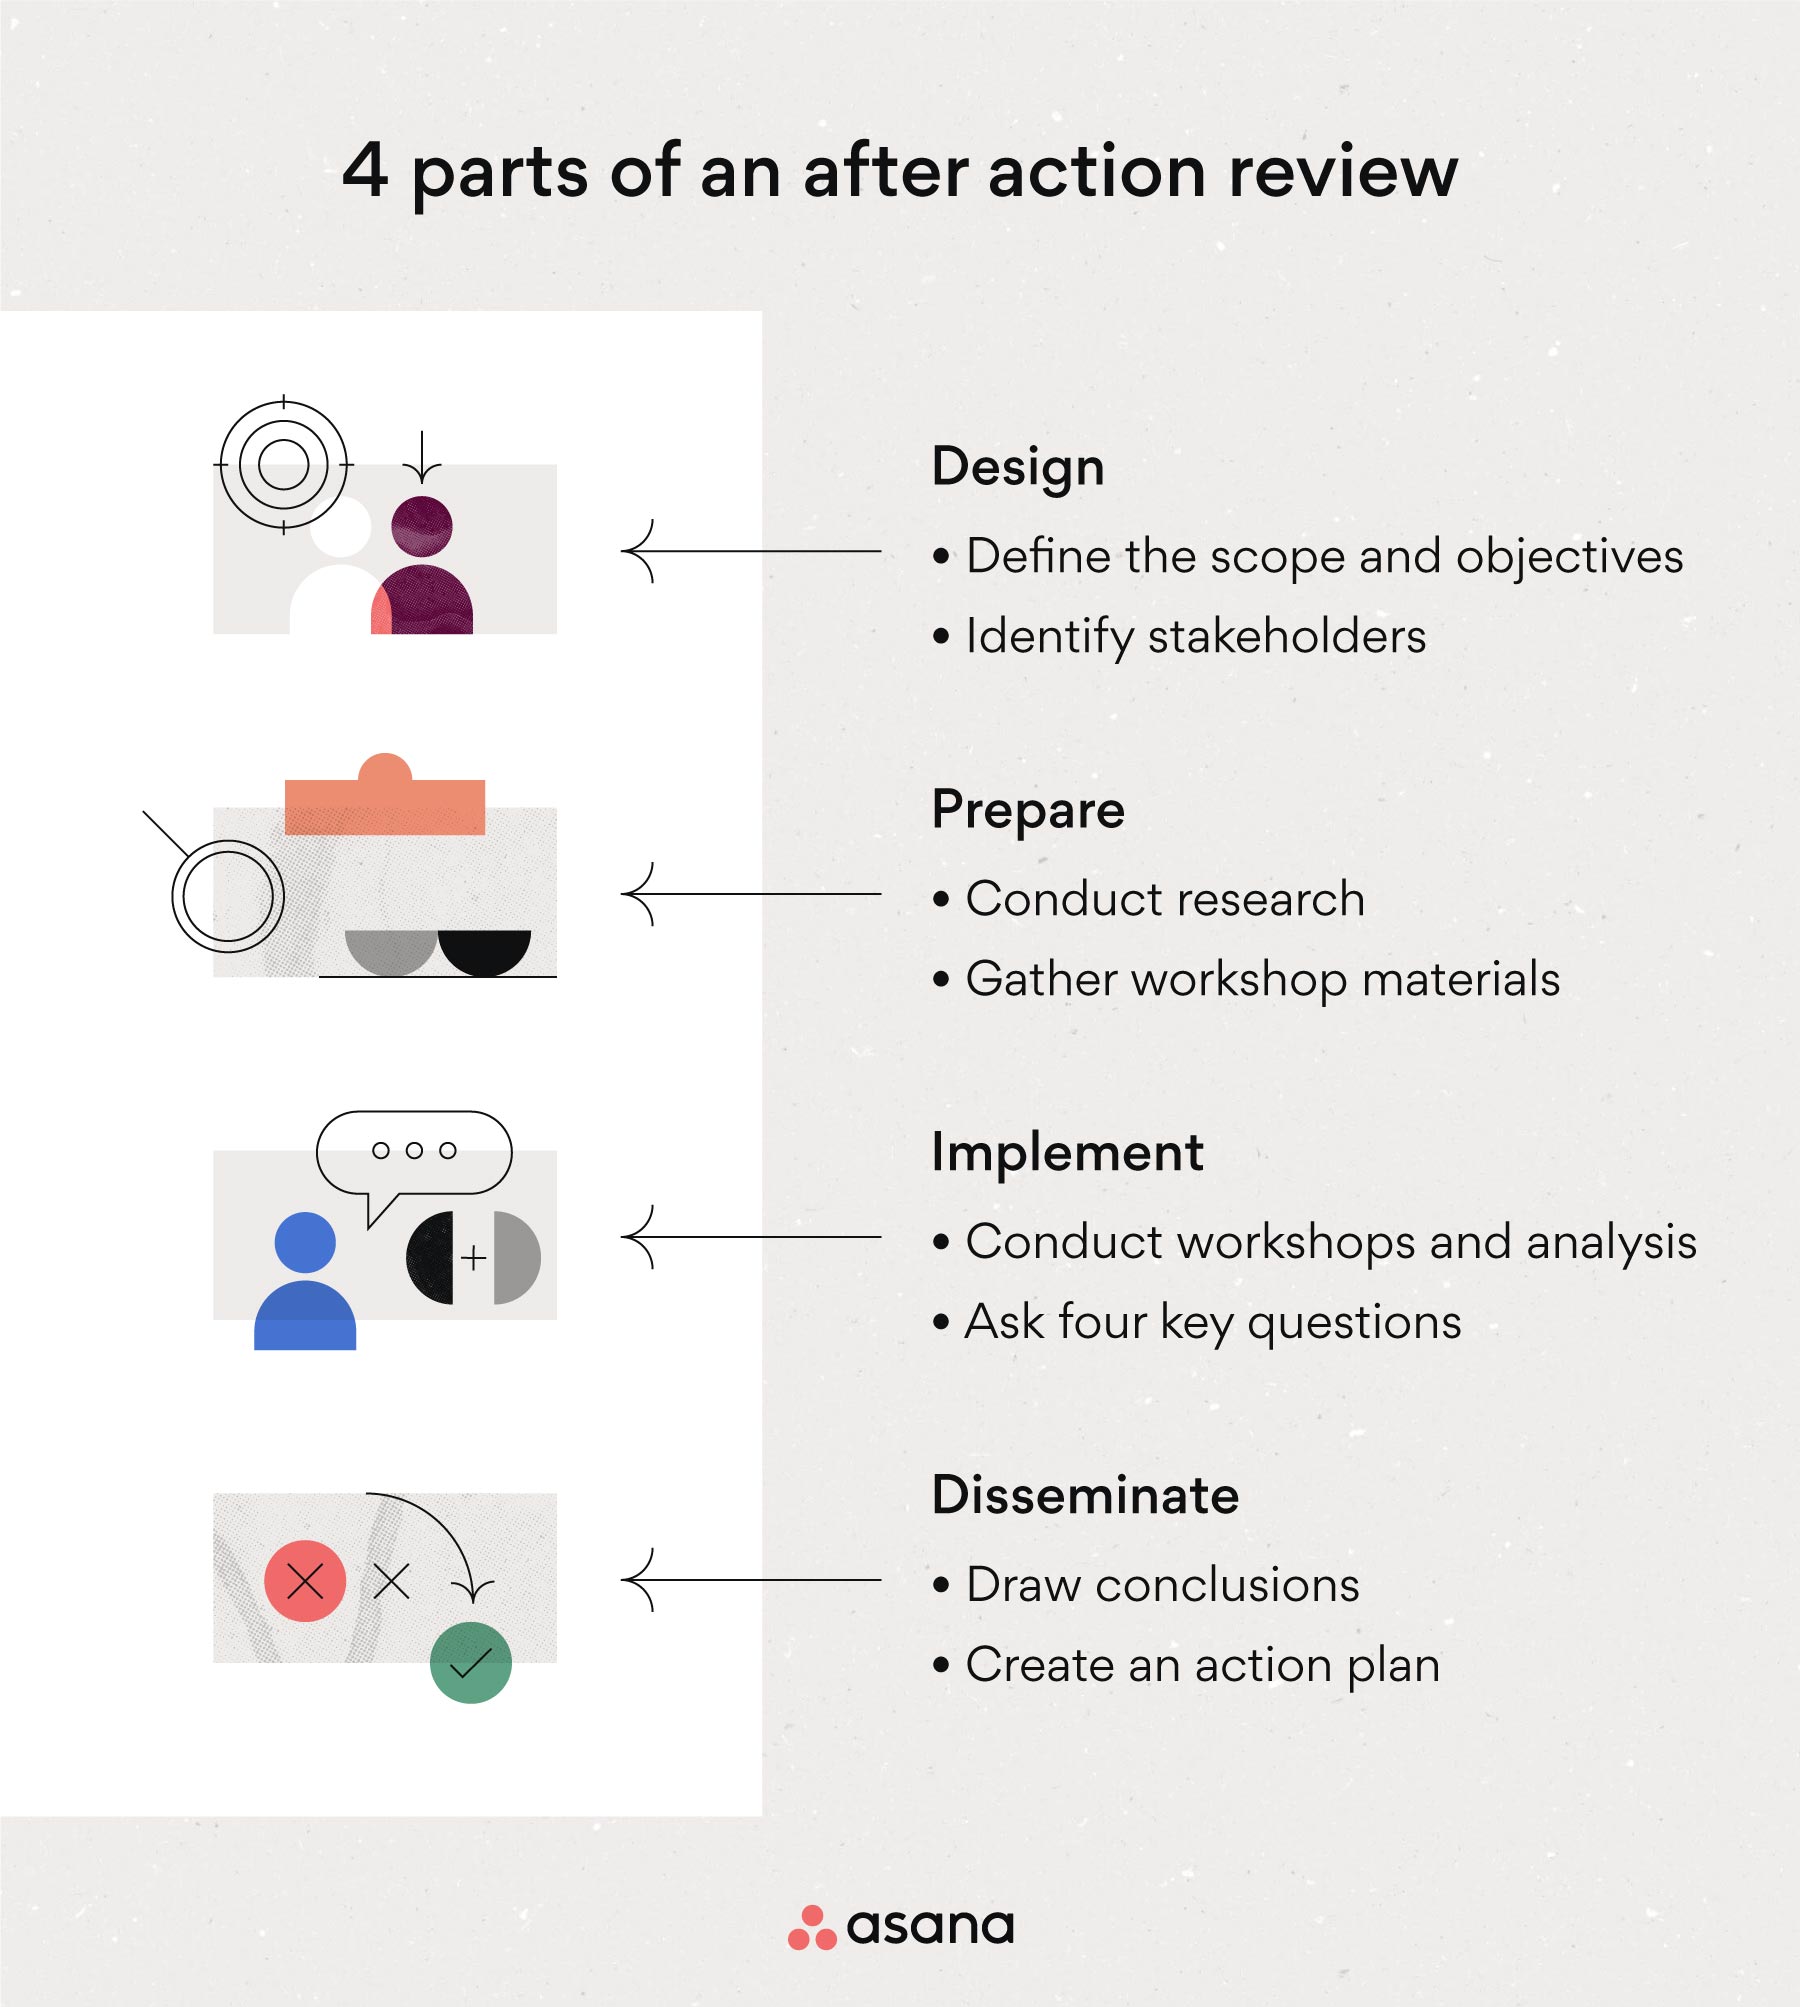 [inline illustration] 4 parts of an after action review (infographic)